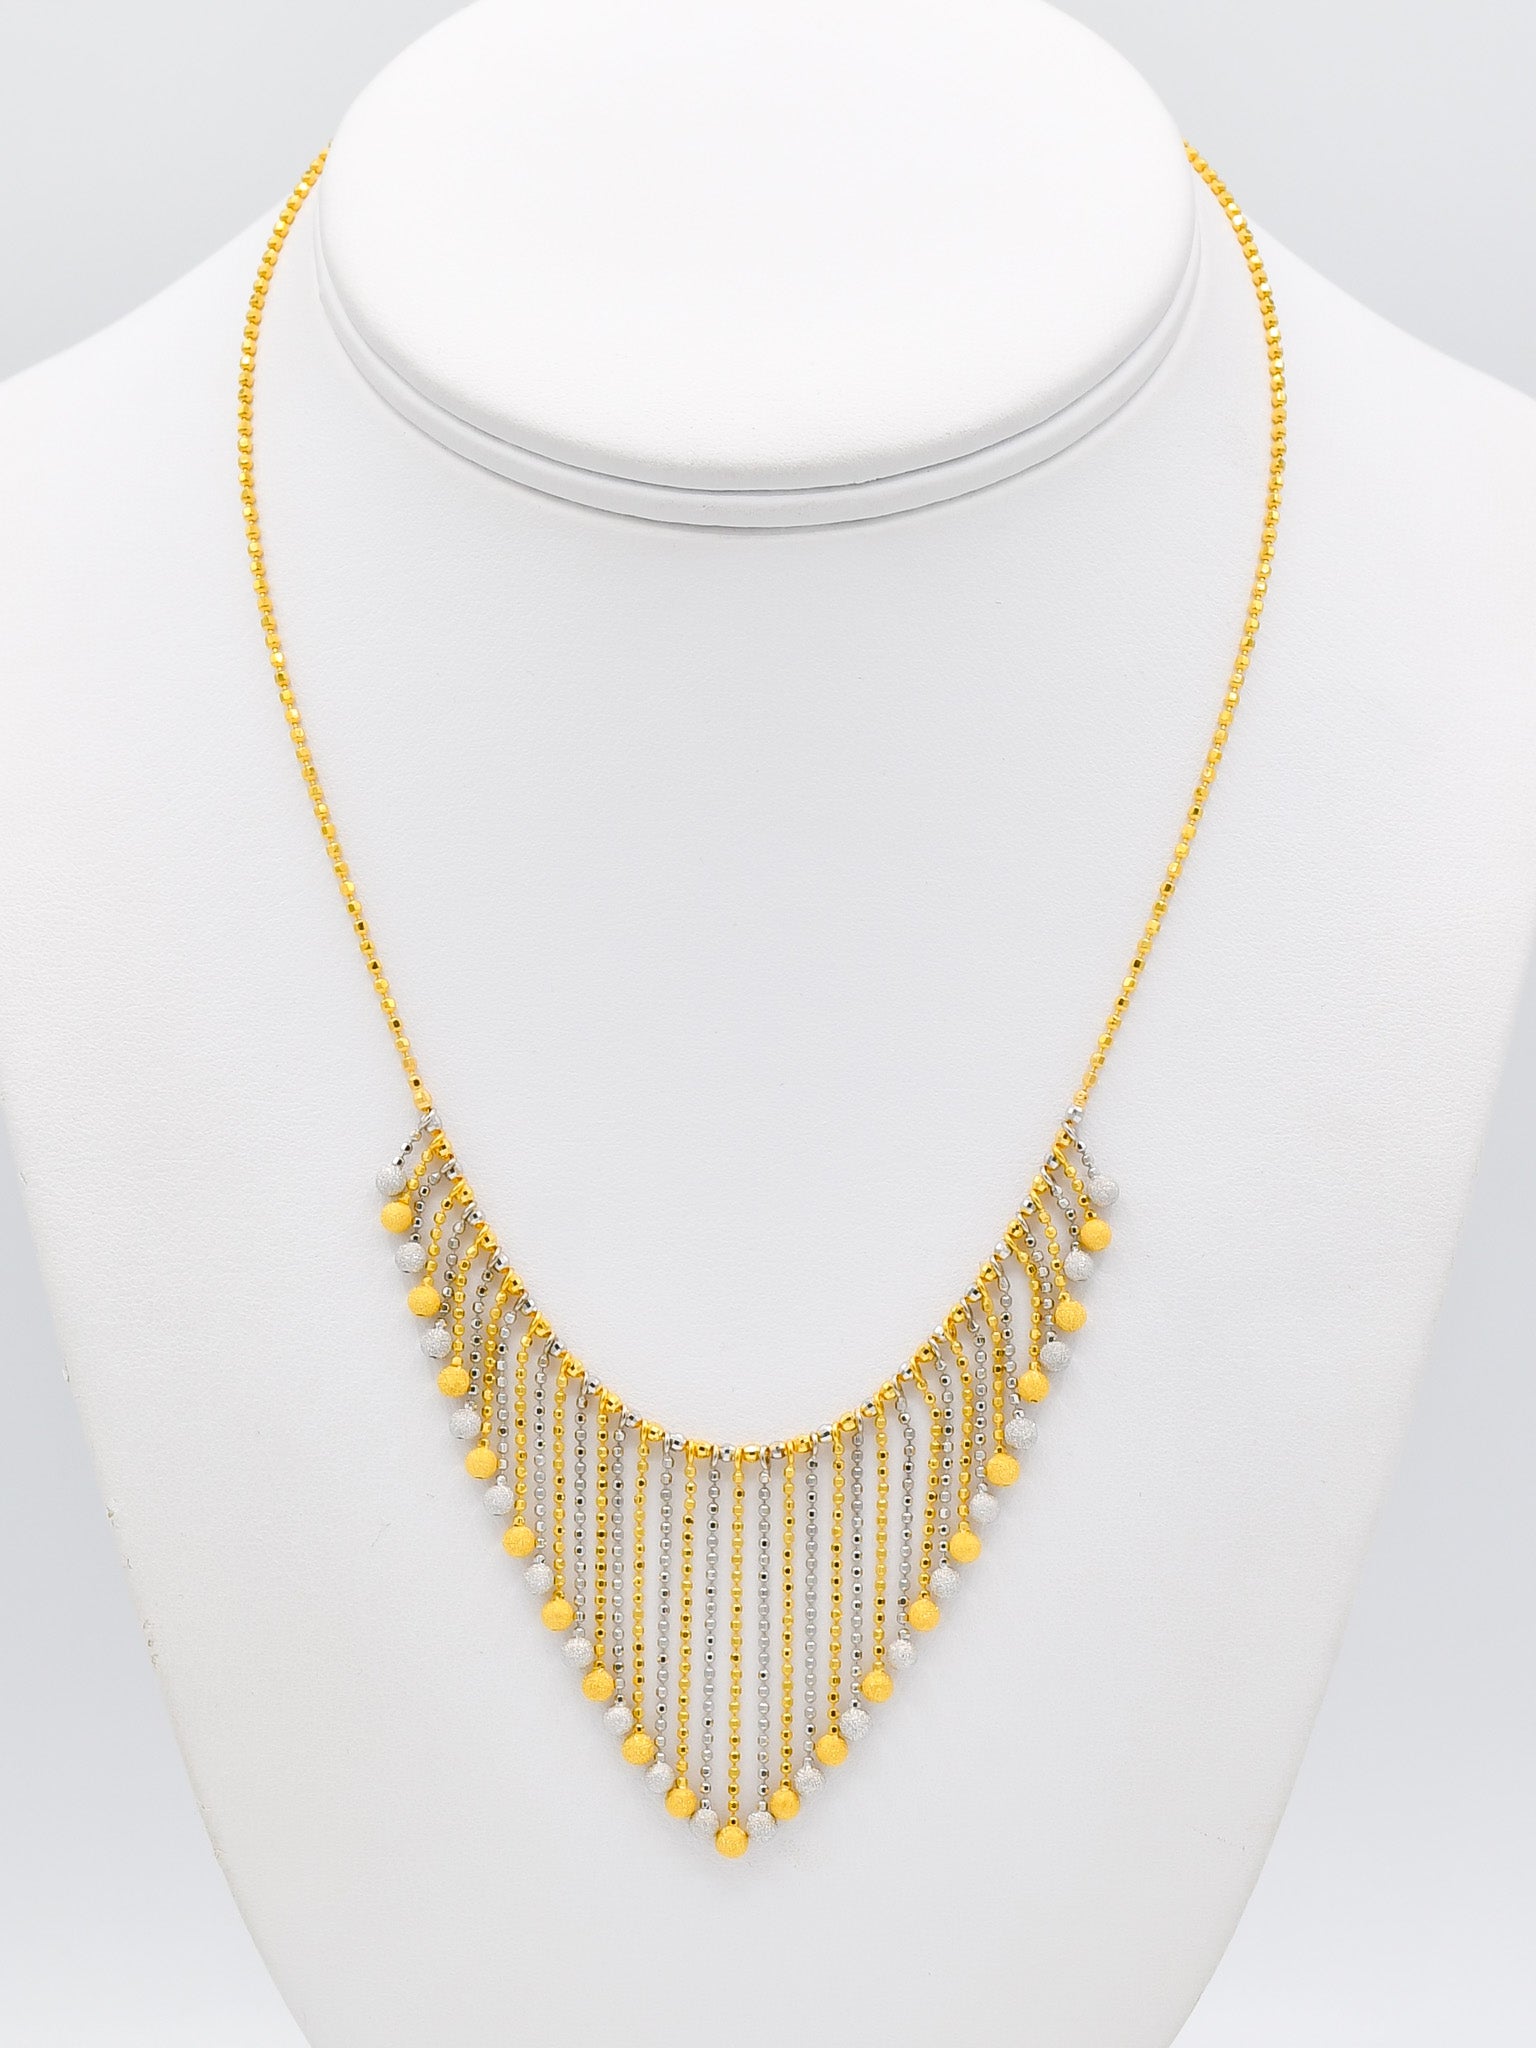 22ct Gold Two Tone Ball Drop Necklace Set - Roop Darshan